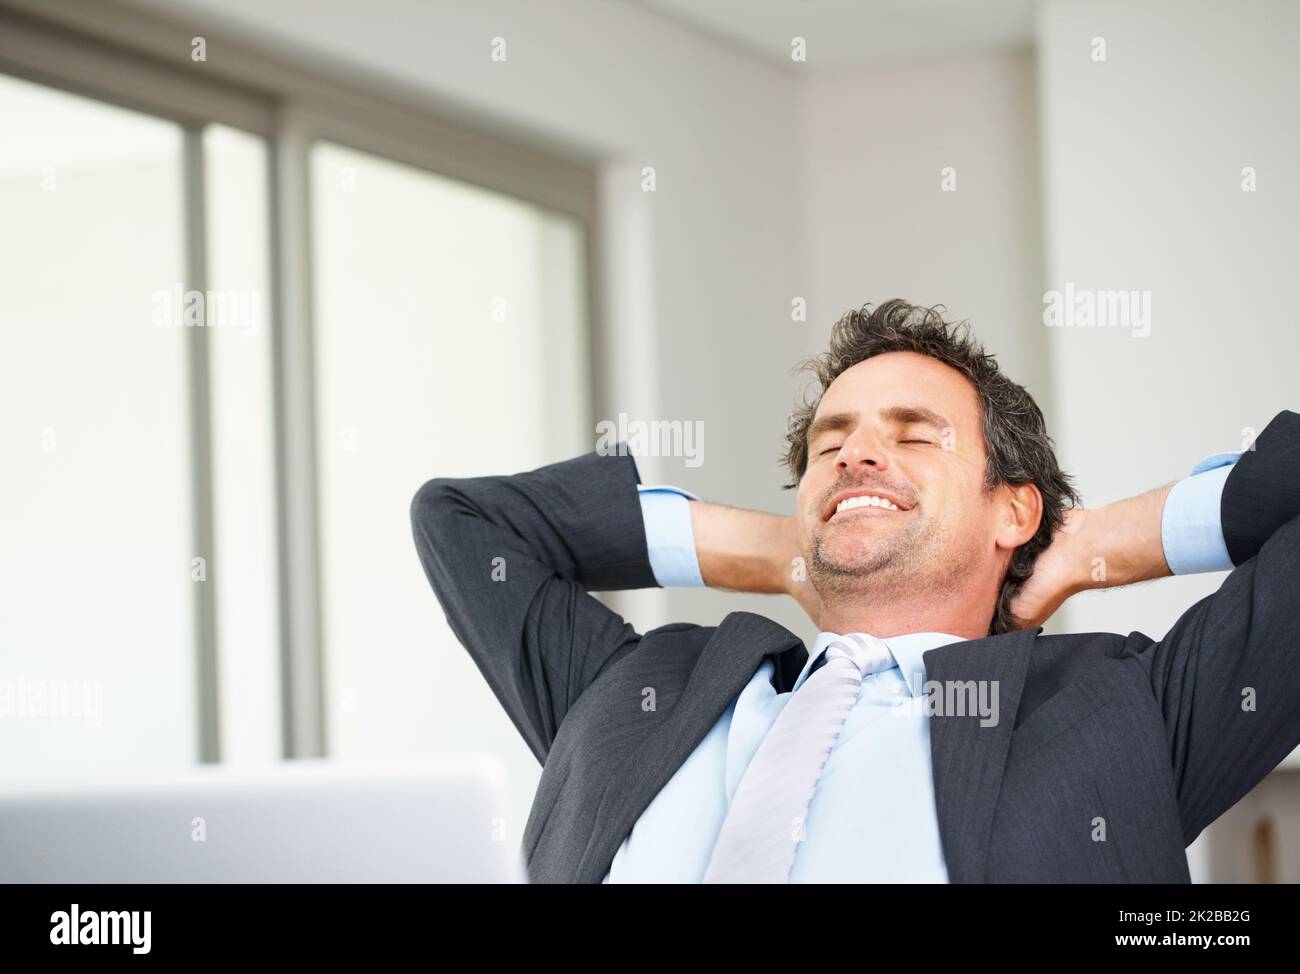 Relaxed executive using laptop. Smart mature business man using laptop and relaxing with hands behind head. Stock Photo